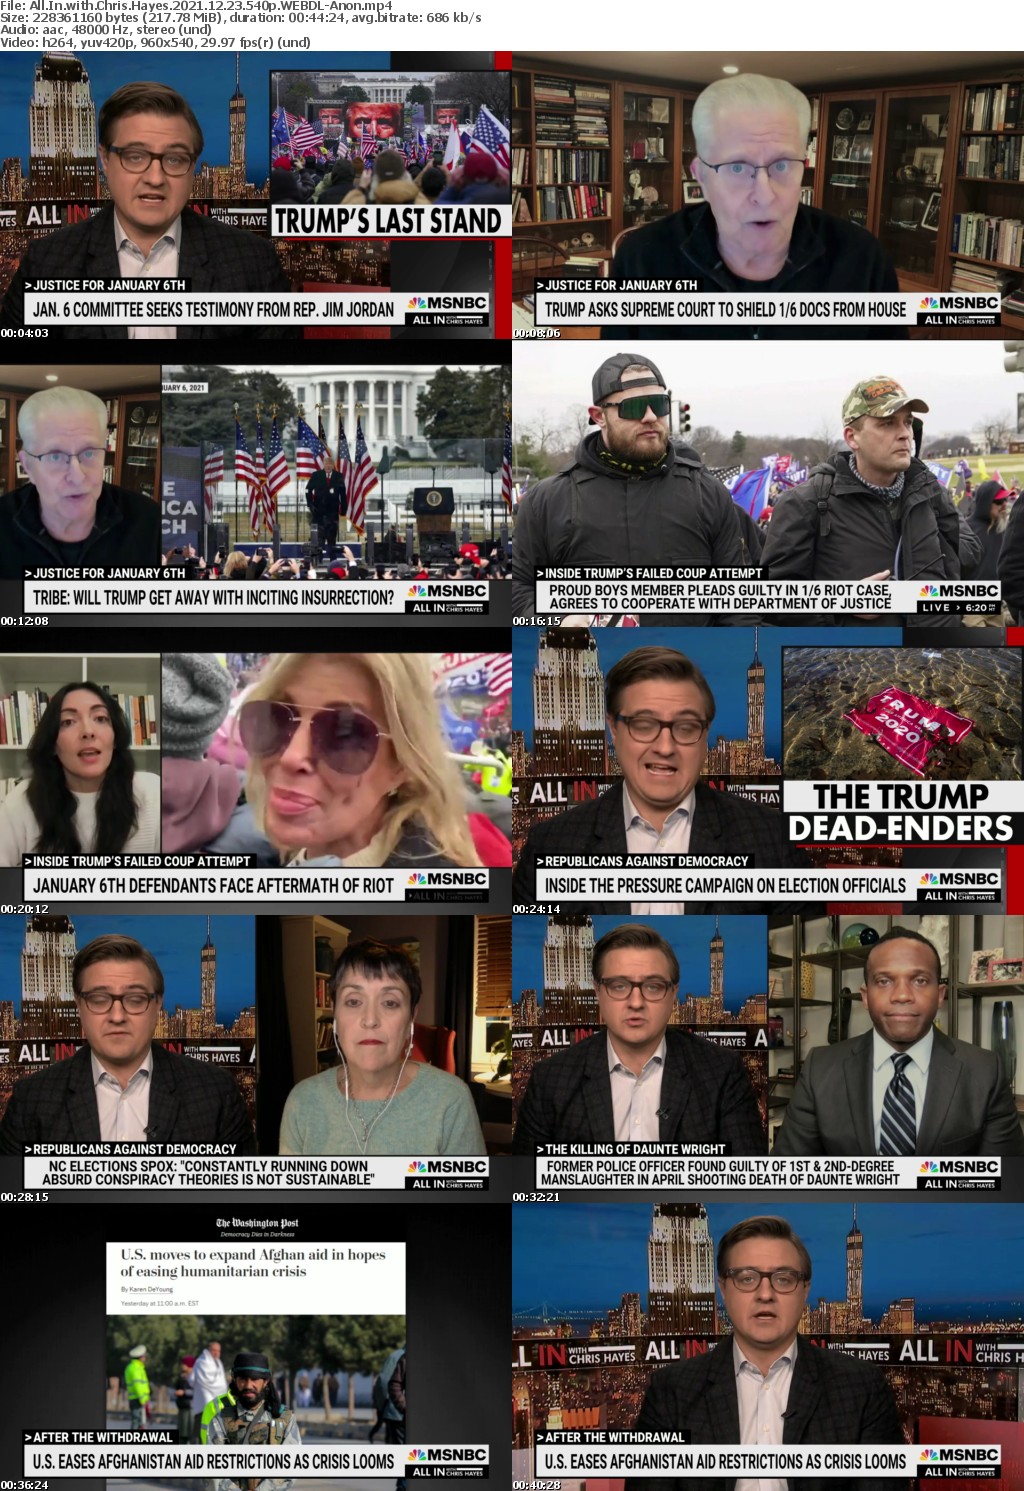 All In with Chris Hayes 2021 12 23 540p WEBDL-Anon